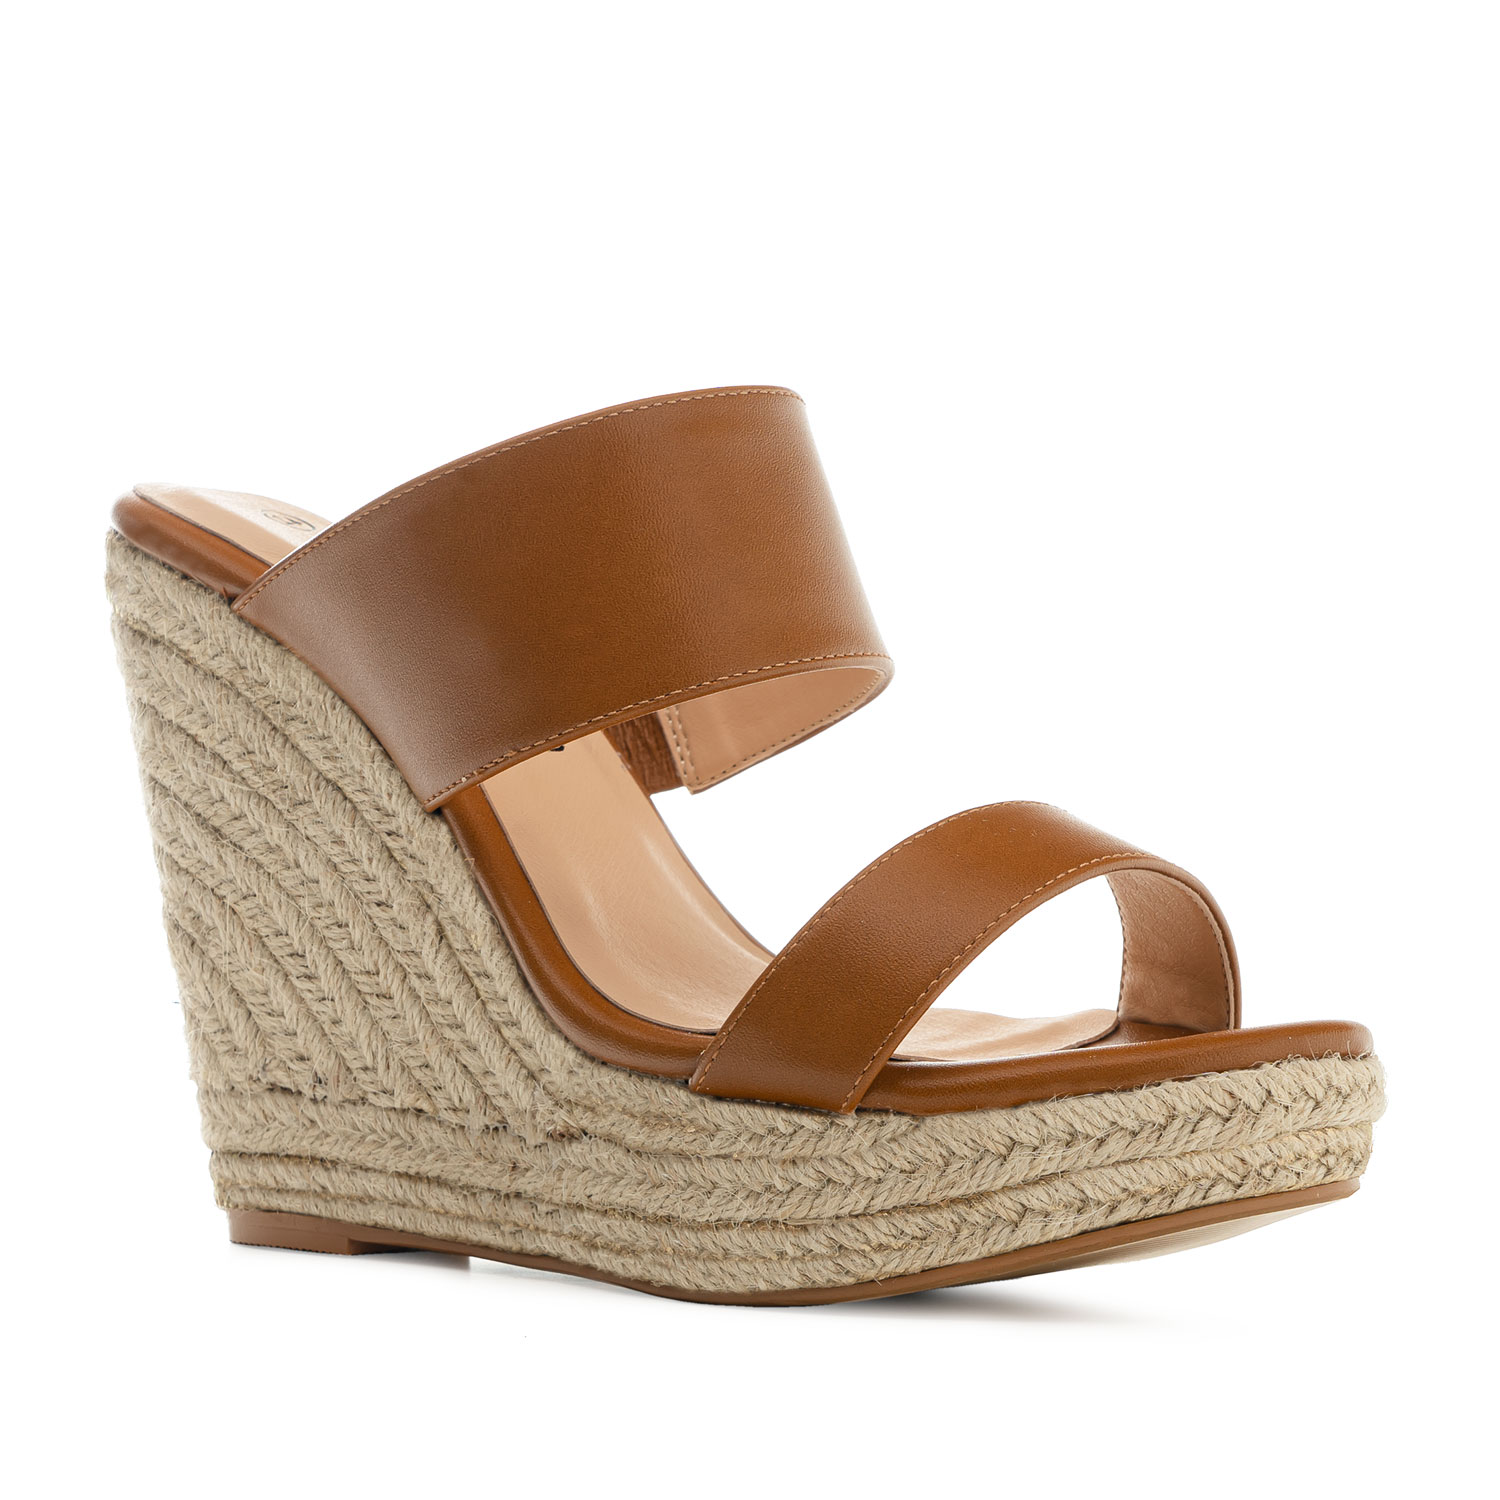 Jute Wedges in Camel-coloured faux Leather 